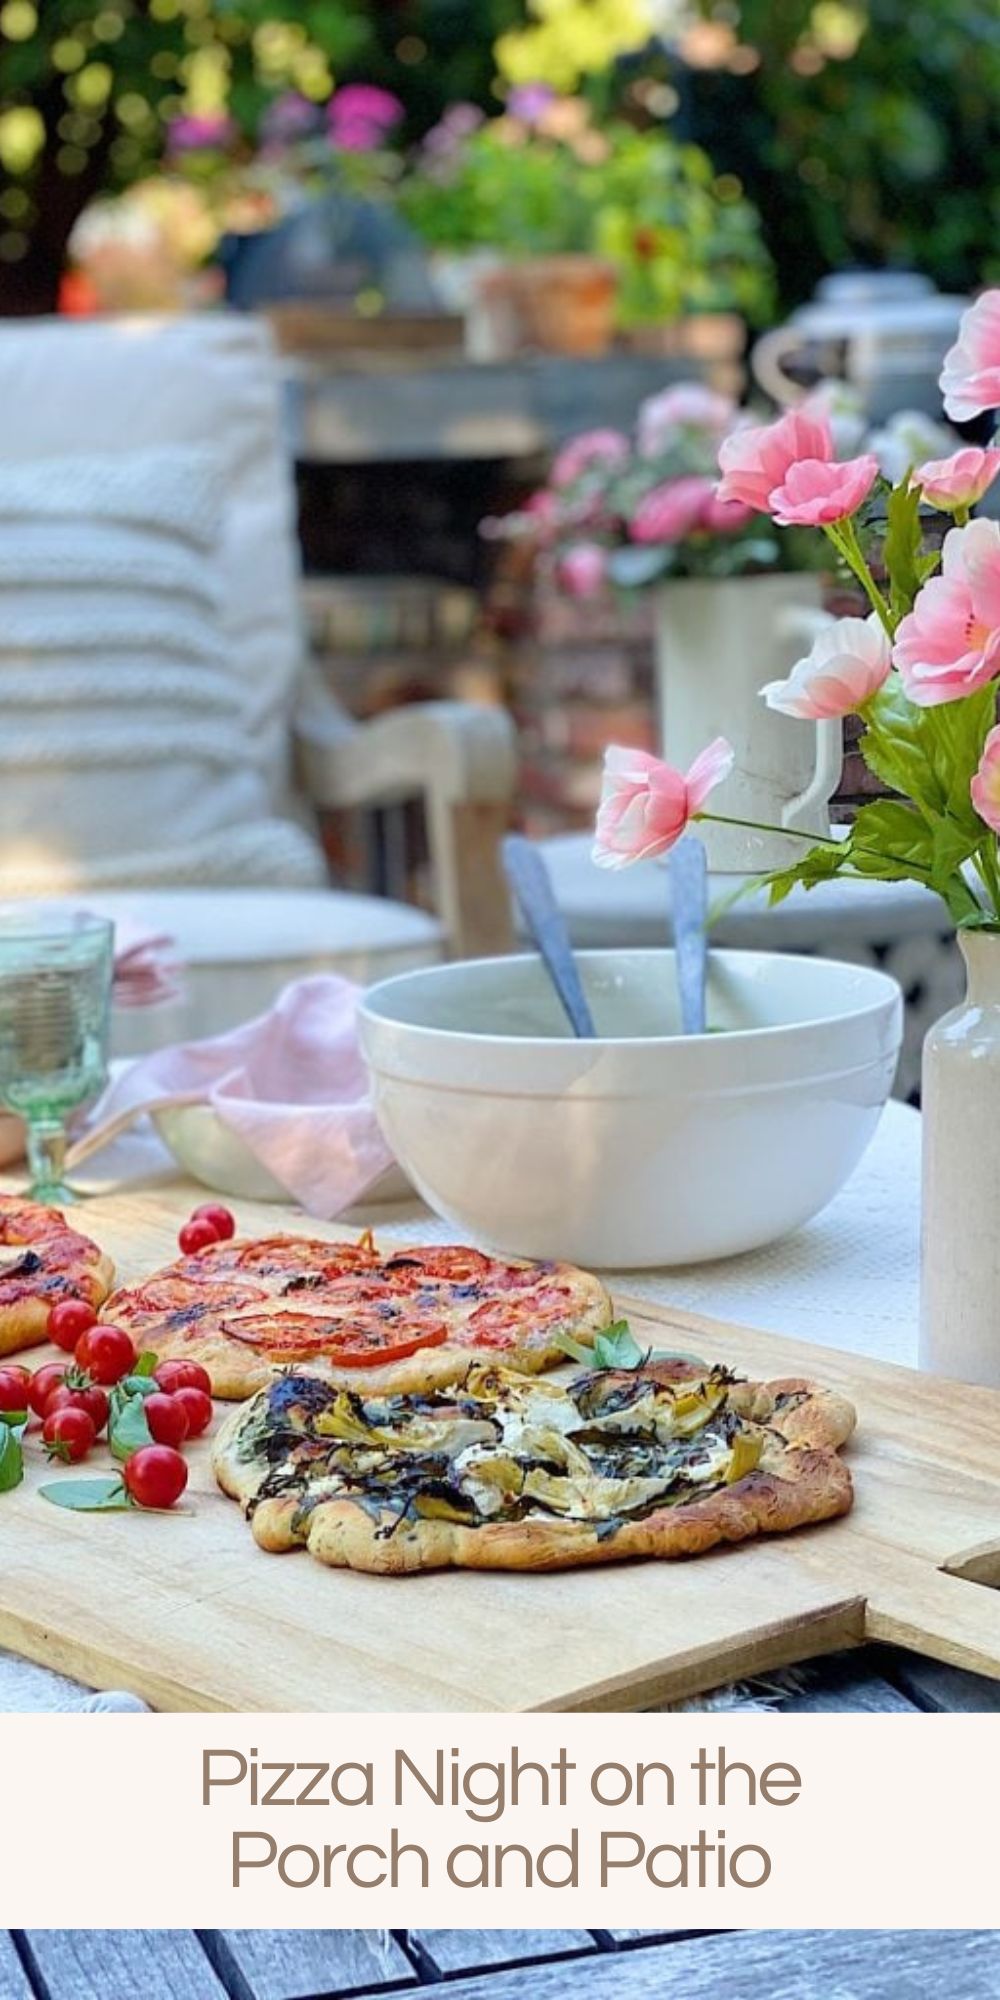 The perfect evening for a spring pizza night on the back porch and patio is tonight. I wanted to find a unique location for a fun dinner, and this is the perfect spot!